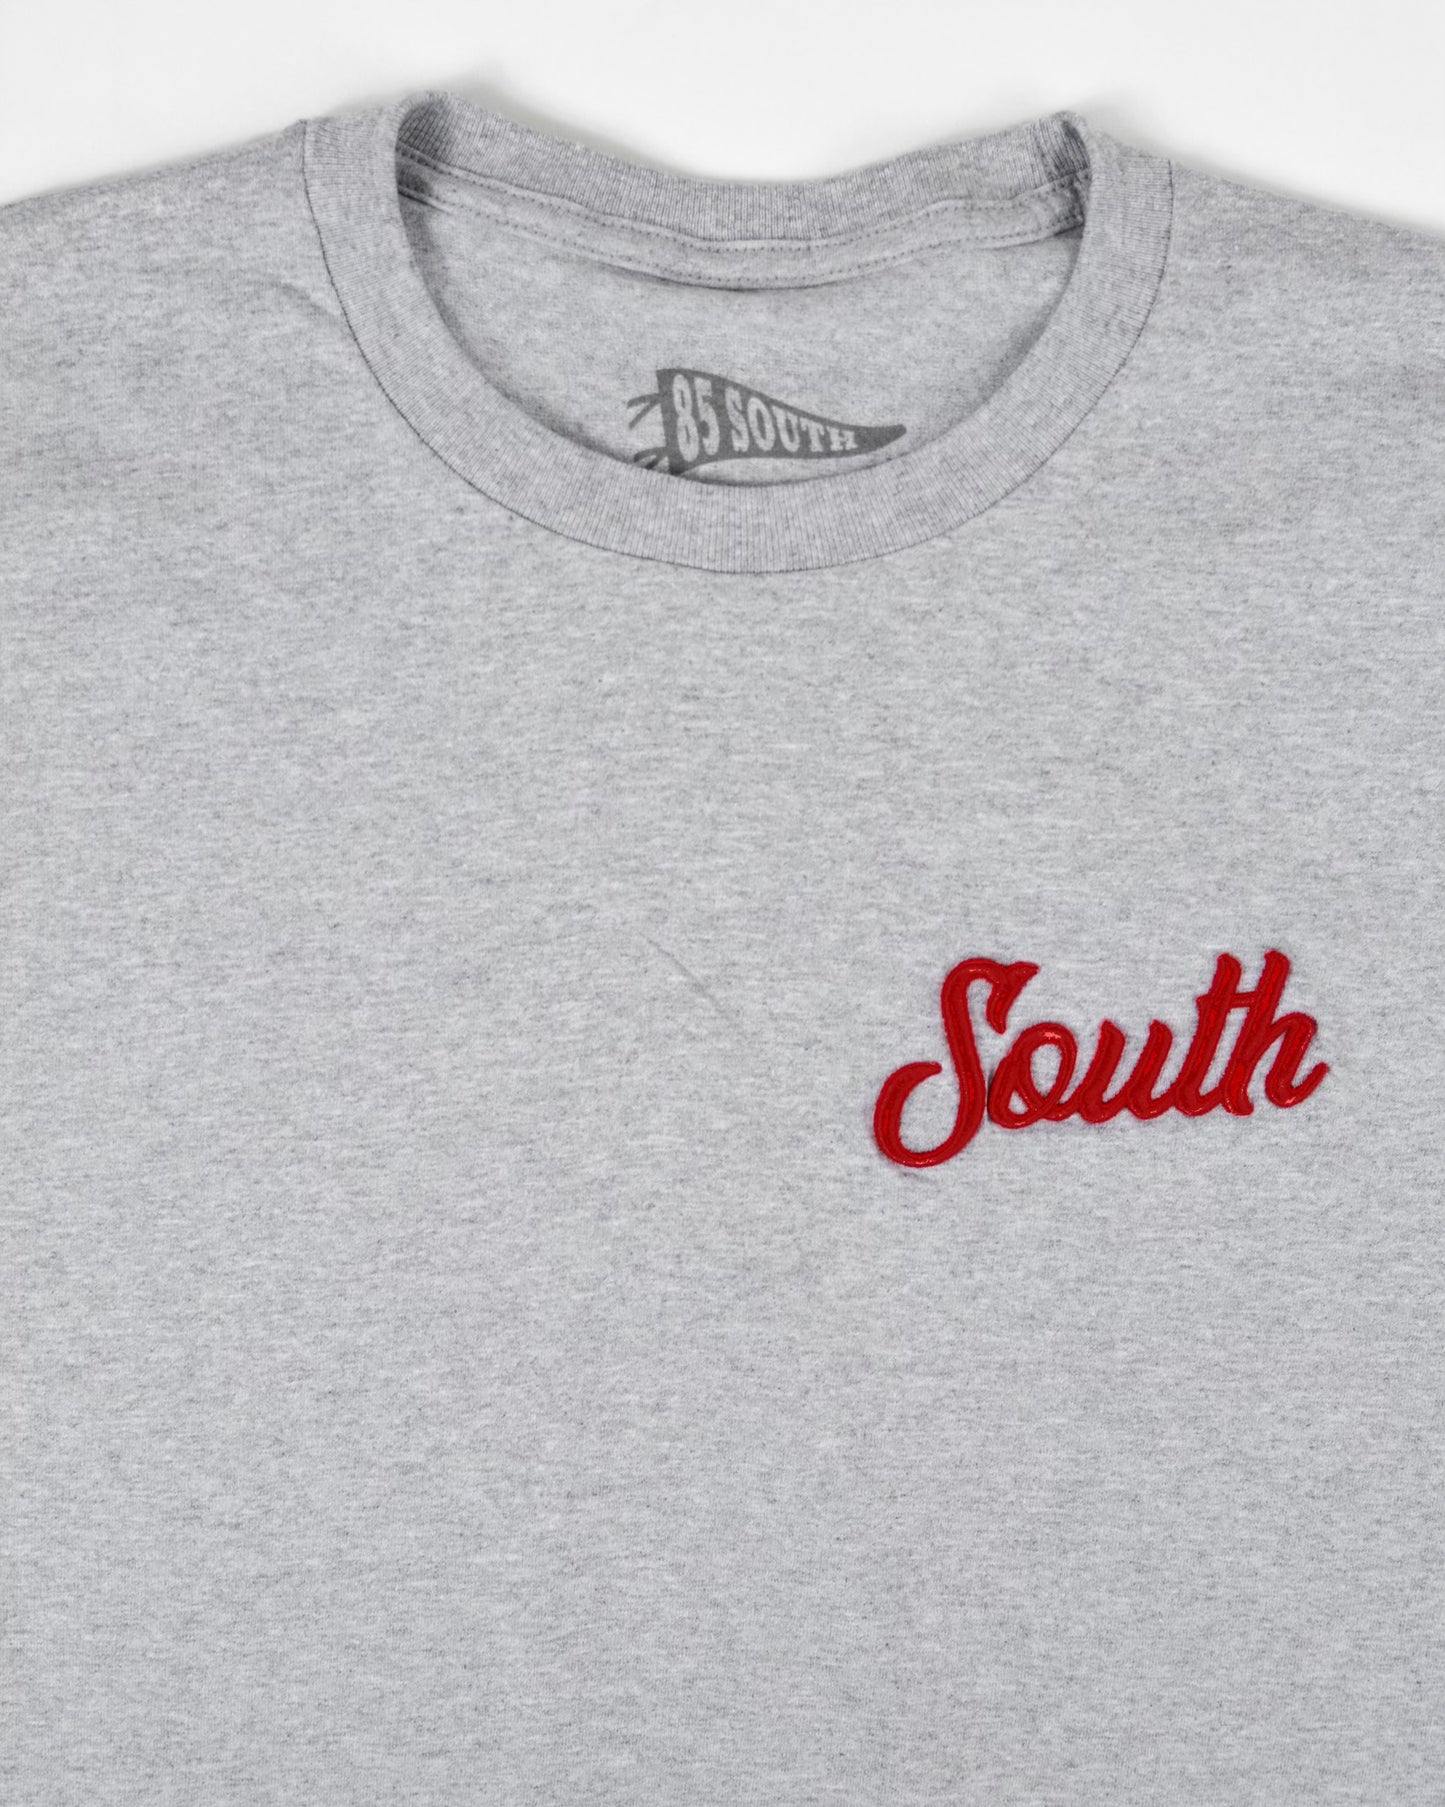 South Side Embroidered Tee - Burgundy